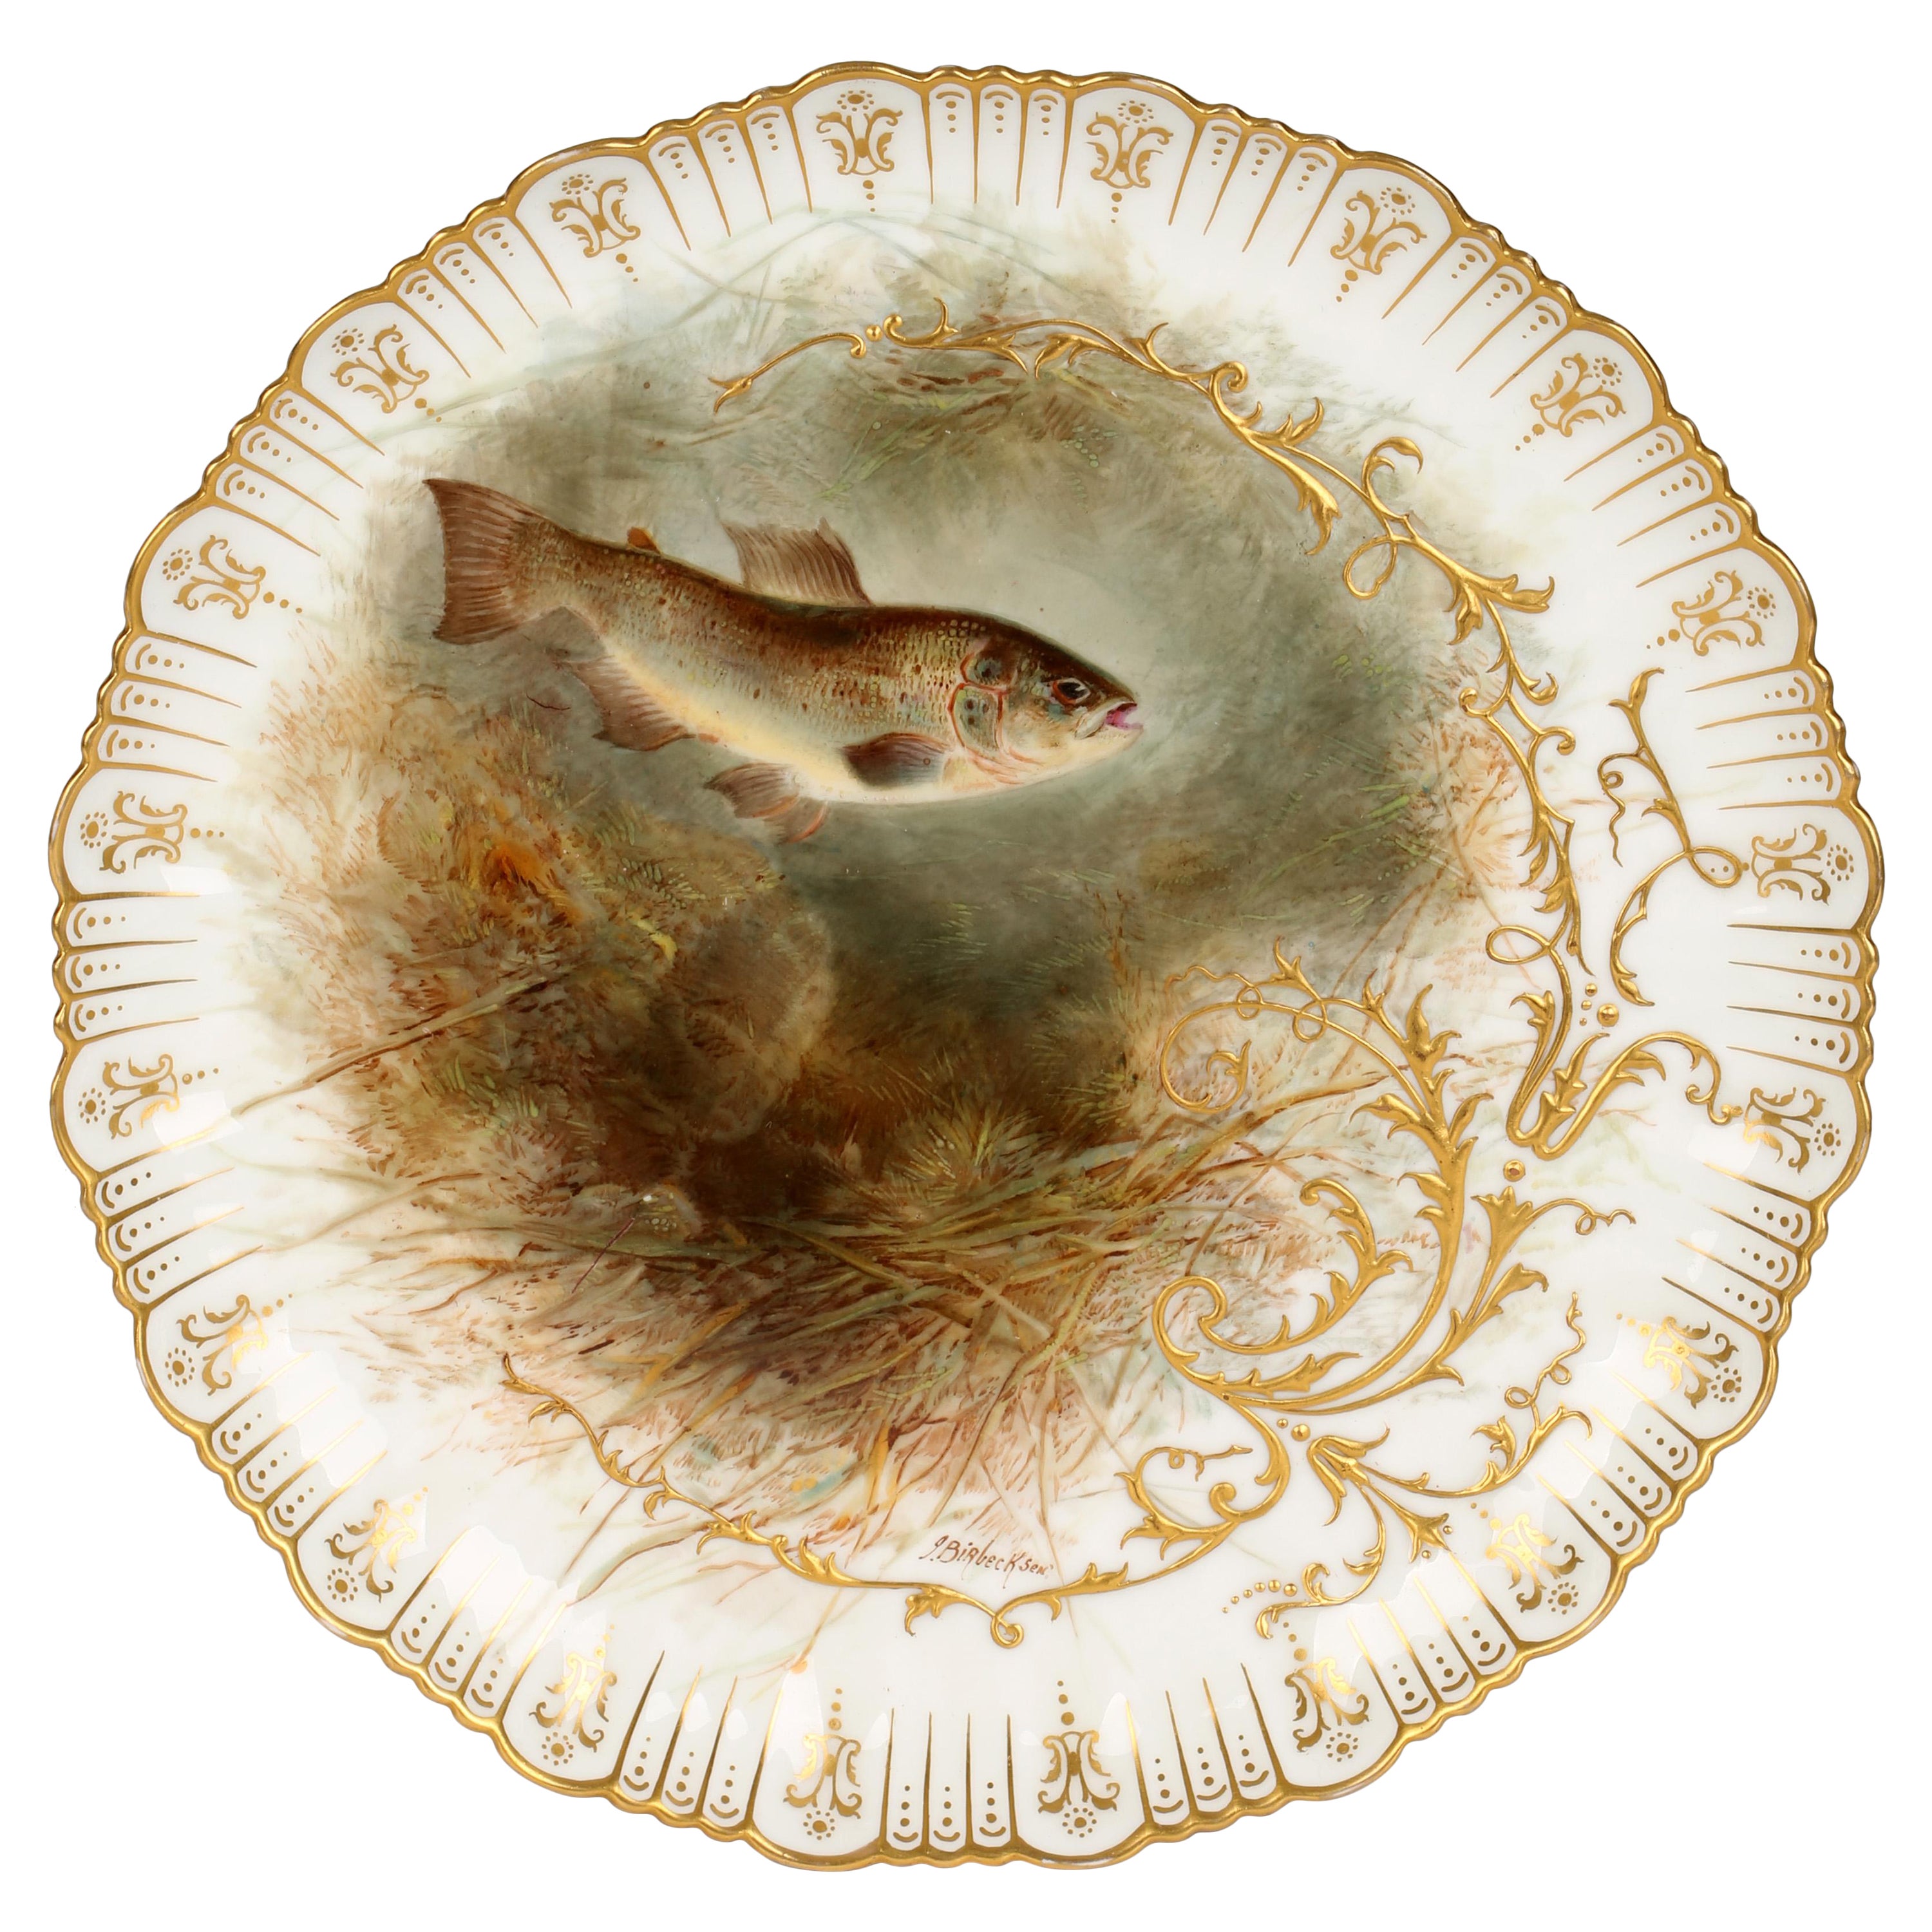 Cauldon Porcelain Cabinet Plate Painted with a Salmon Trout by Joseph Birbeck